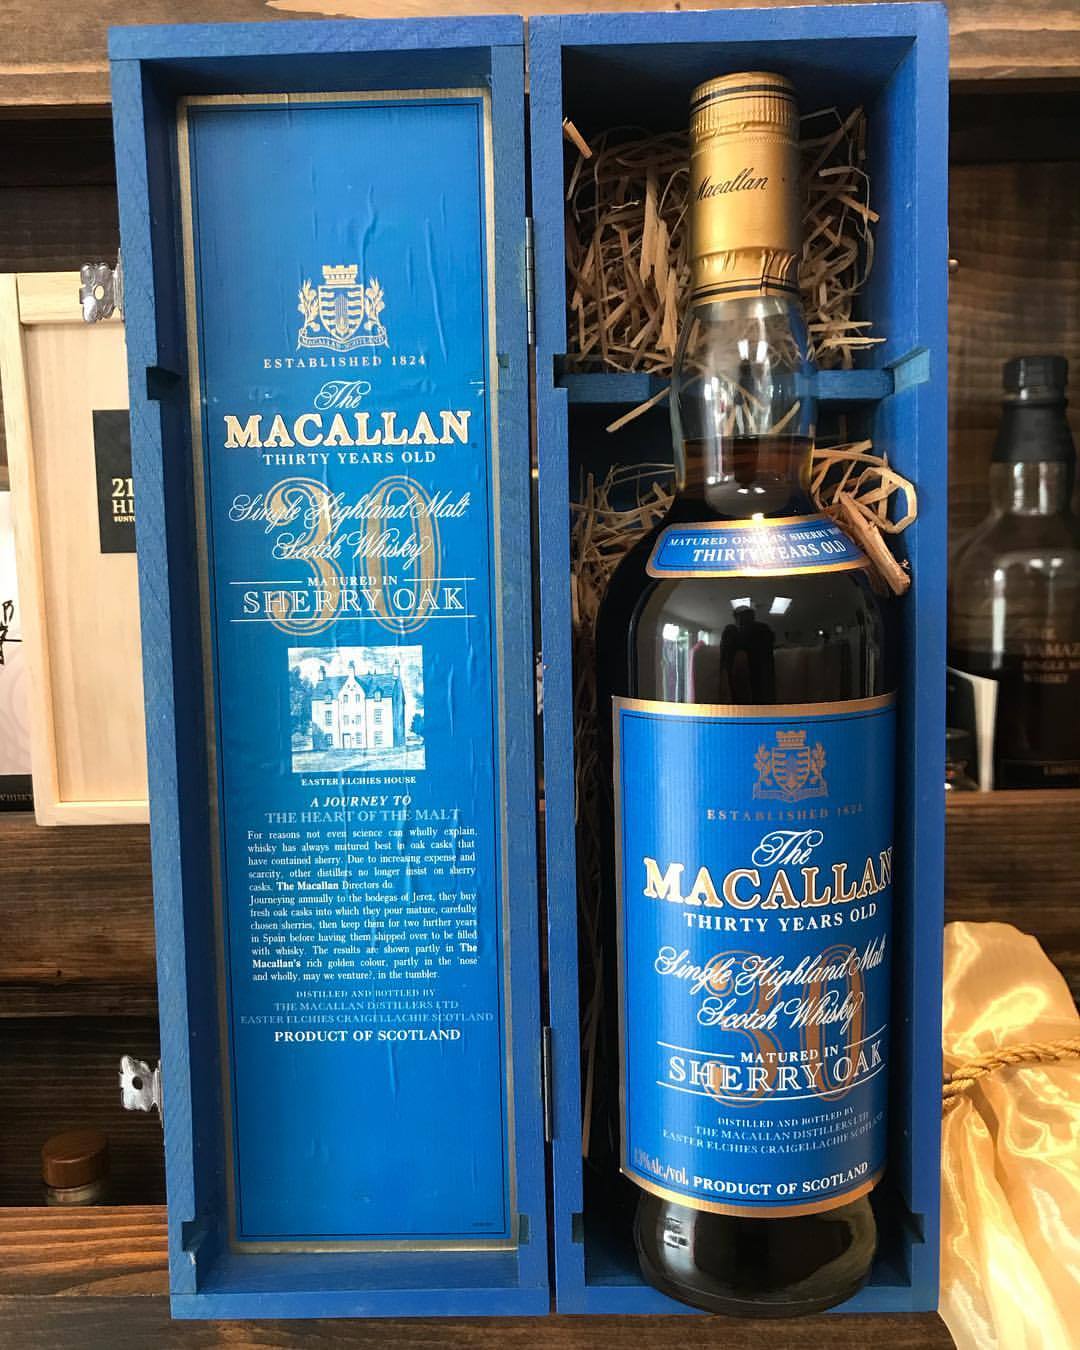 30 Year Old Macallan Dilemma Clubwhisky Com Forum Questions About Whisky